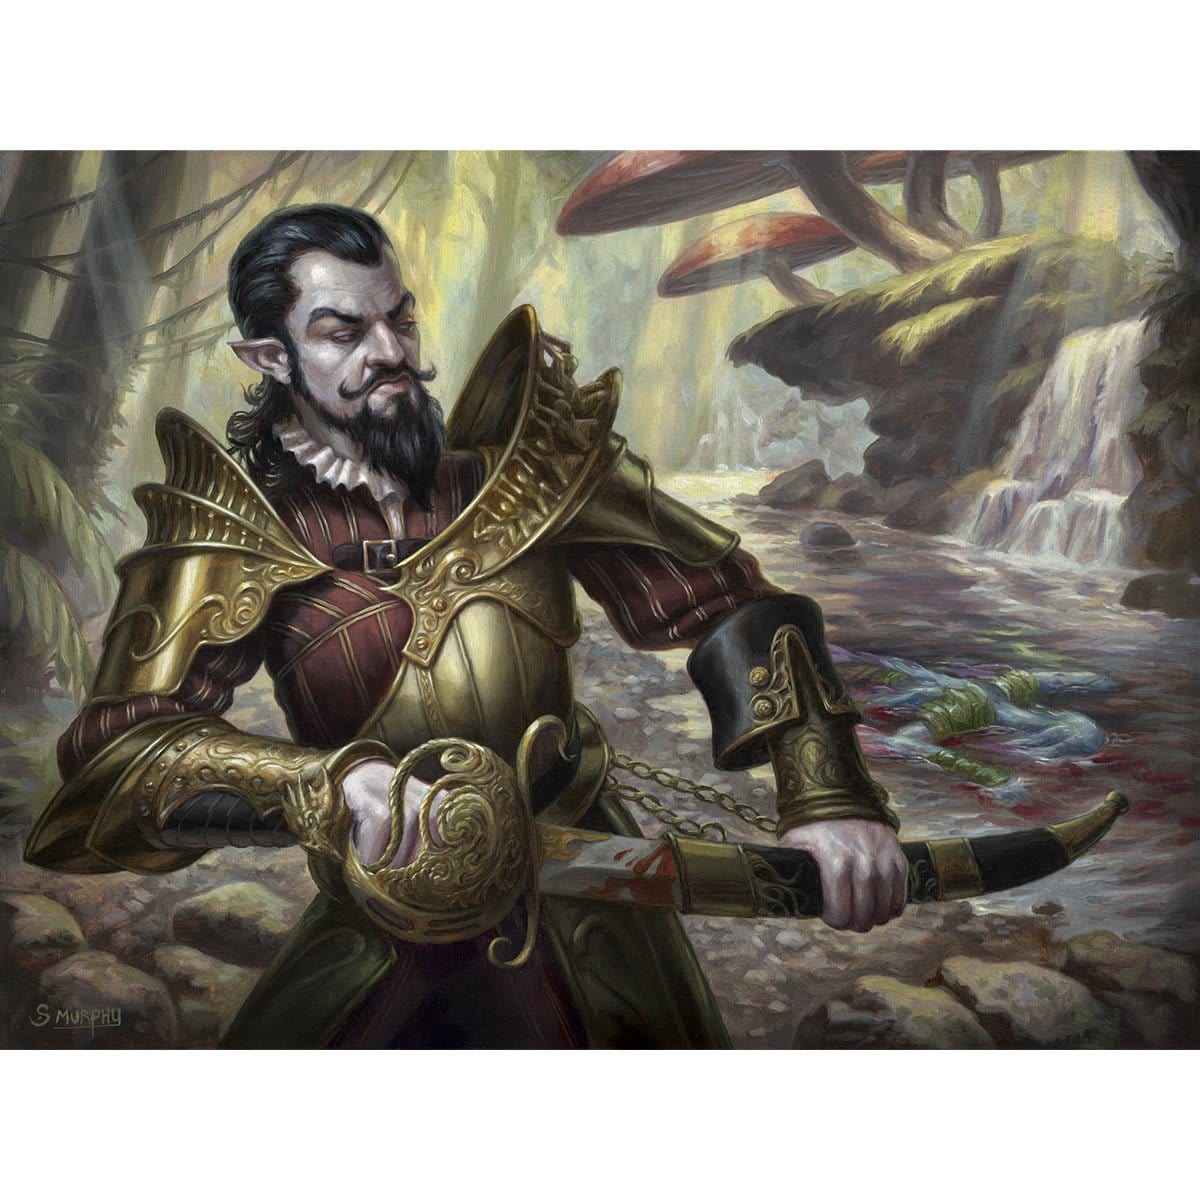 Bishop&#39;s Soldier Print - Print - Original Magic Art - Accessories for Magic the Gathering and other card games